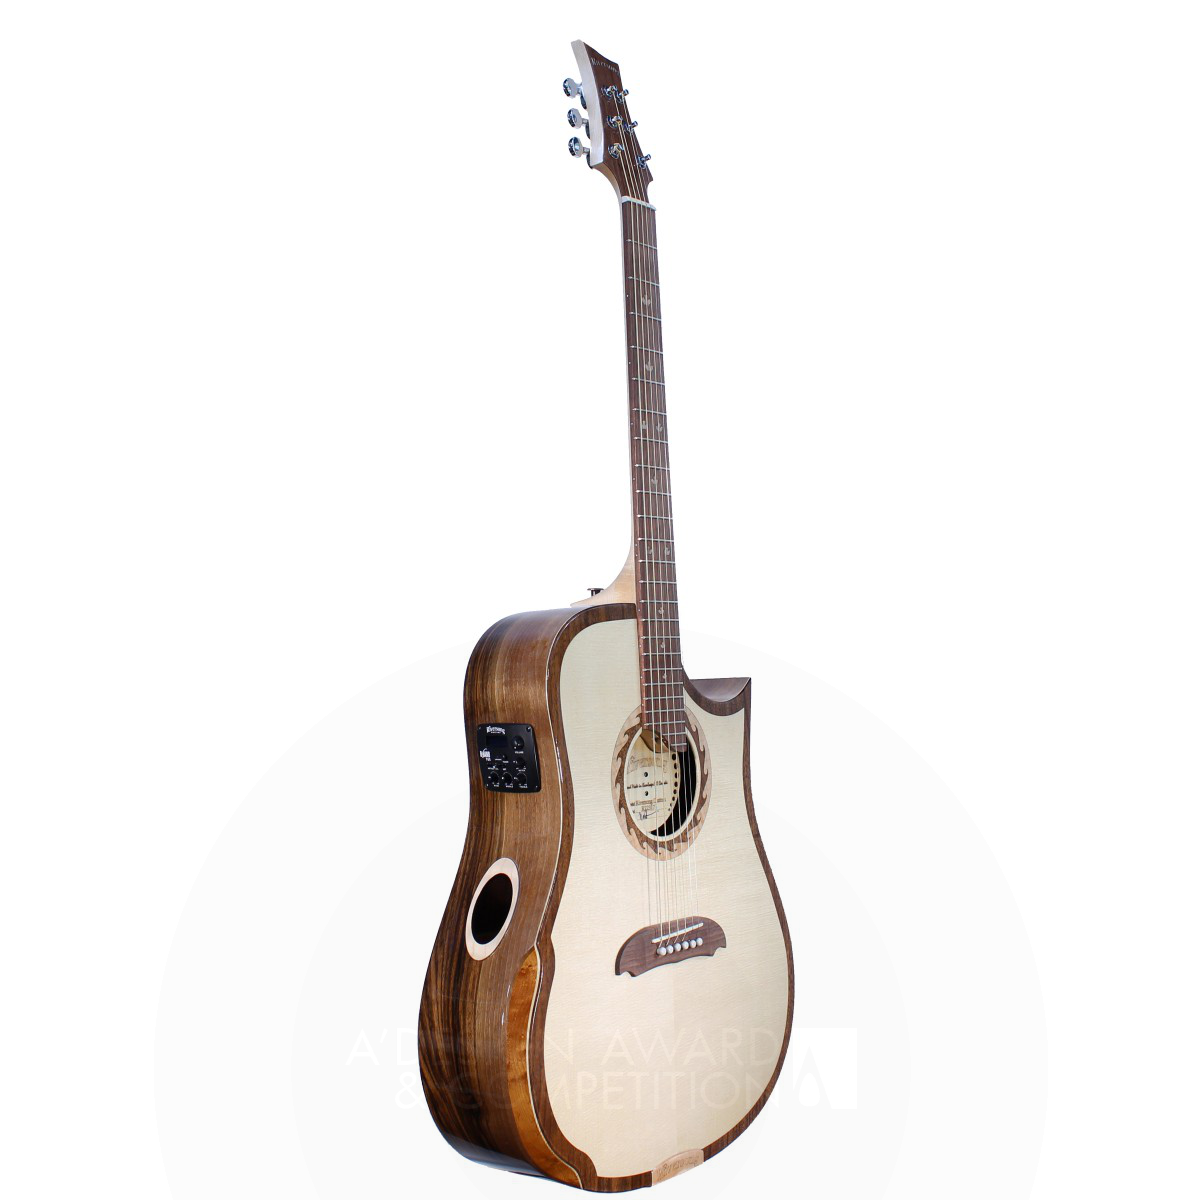 Tradition CDN Custom Adjustable Acoustic Guitar by Mike Miltimore